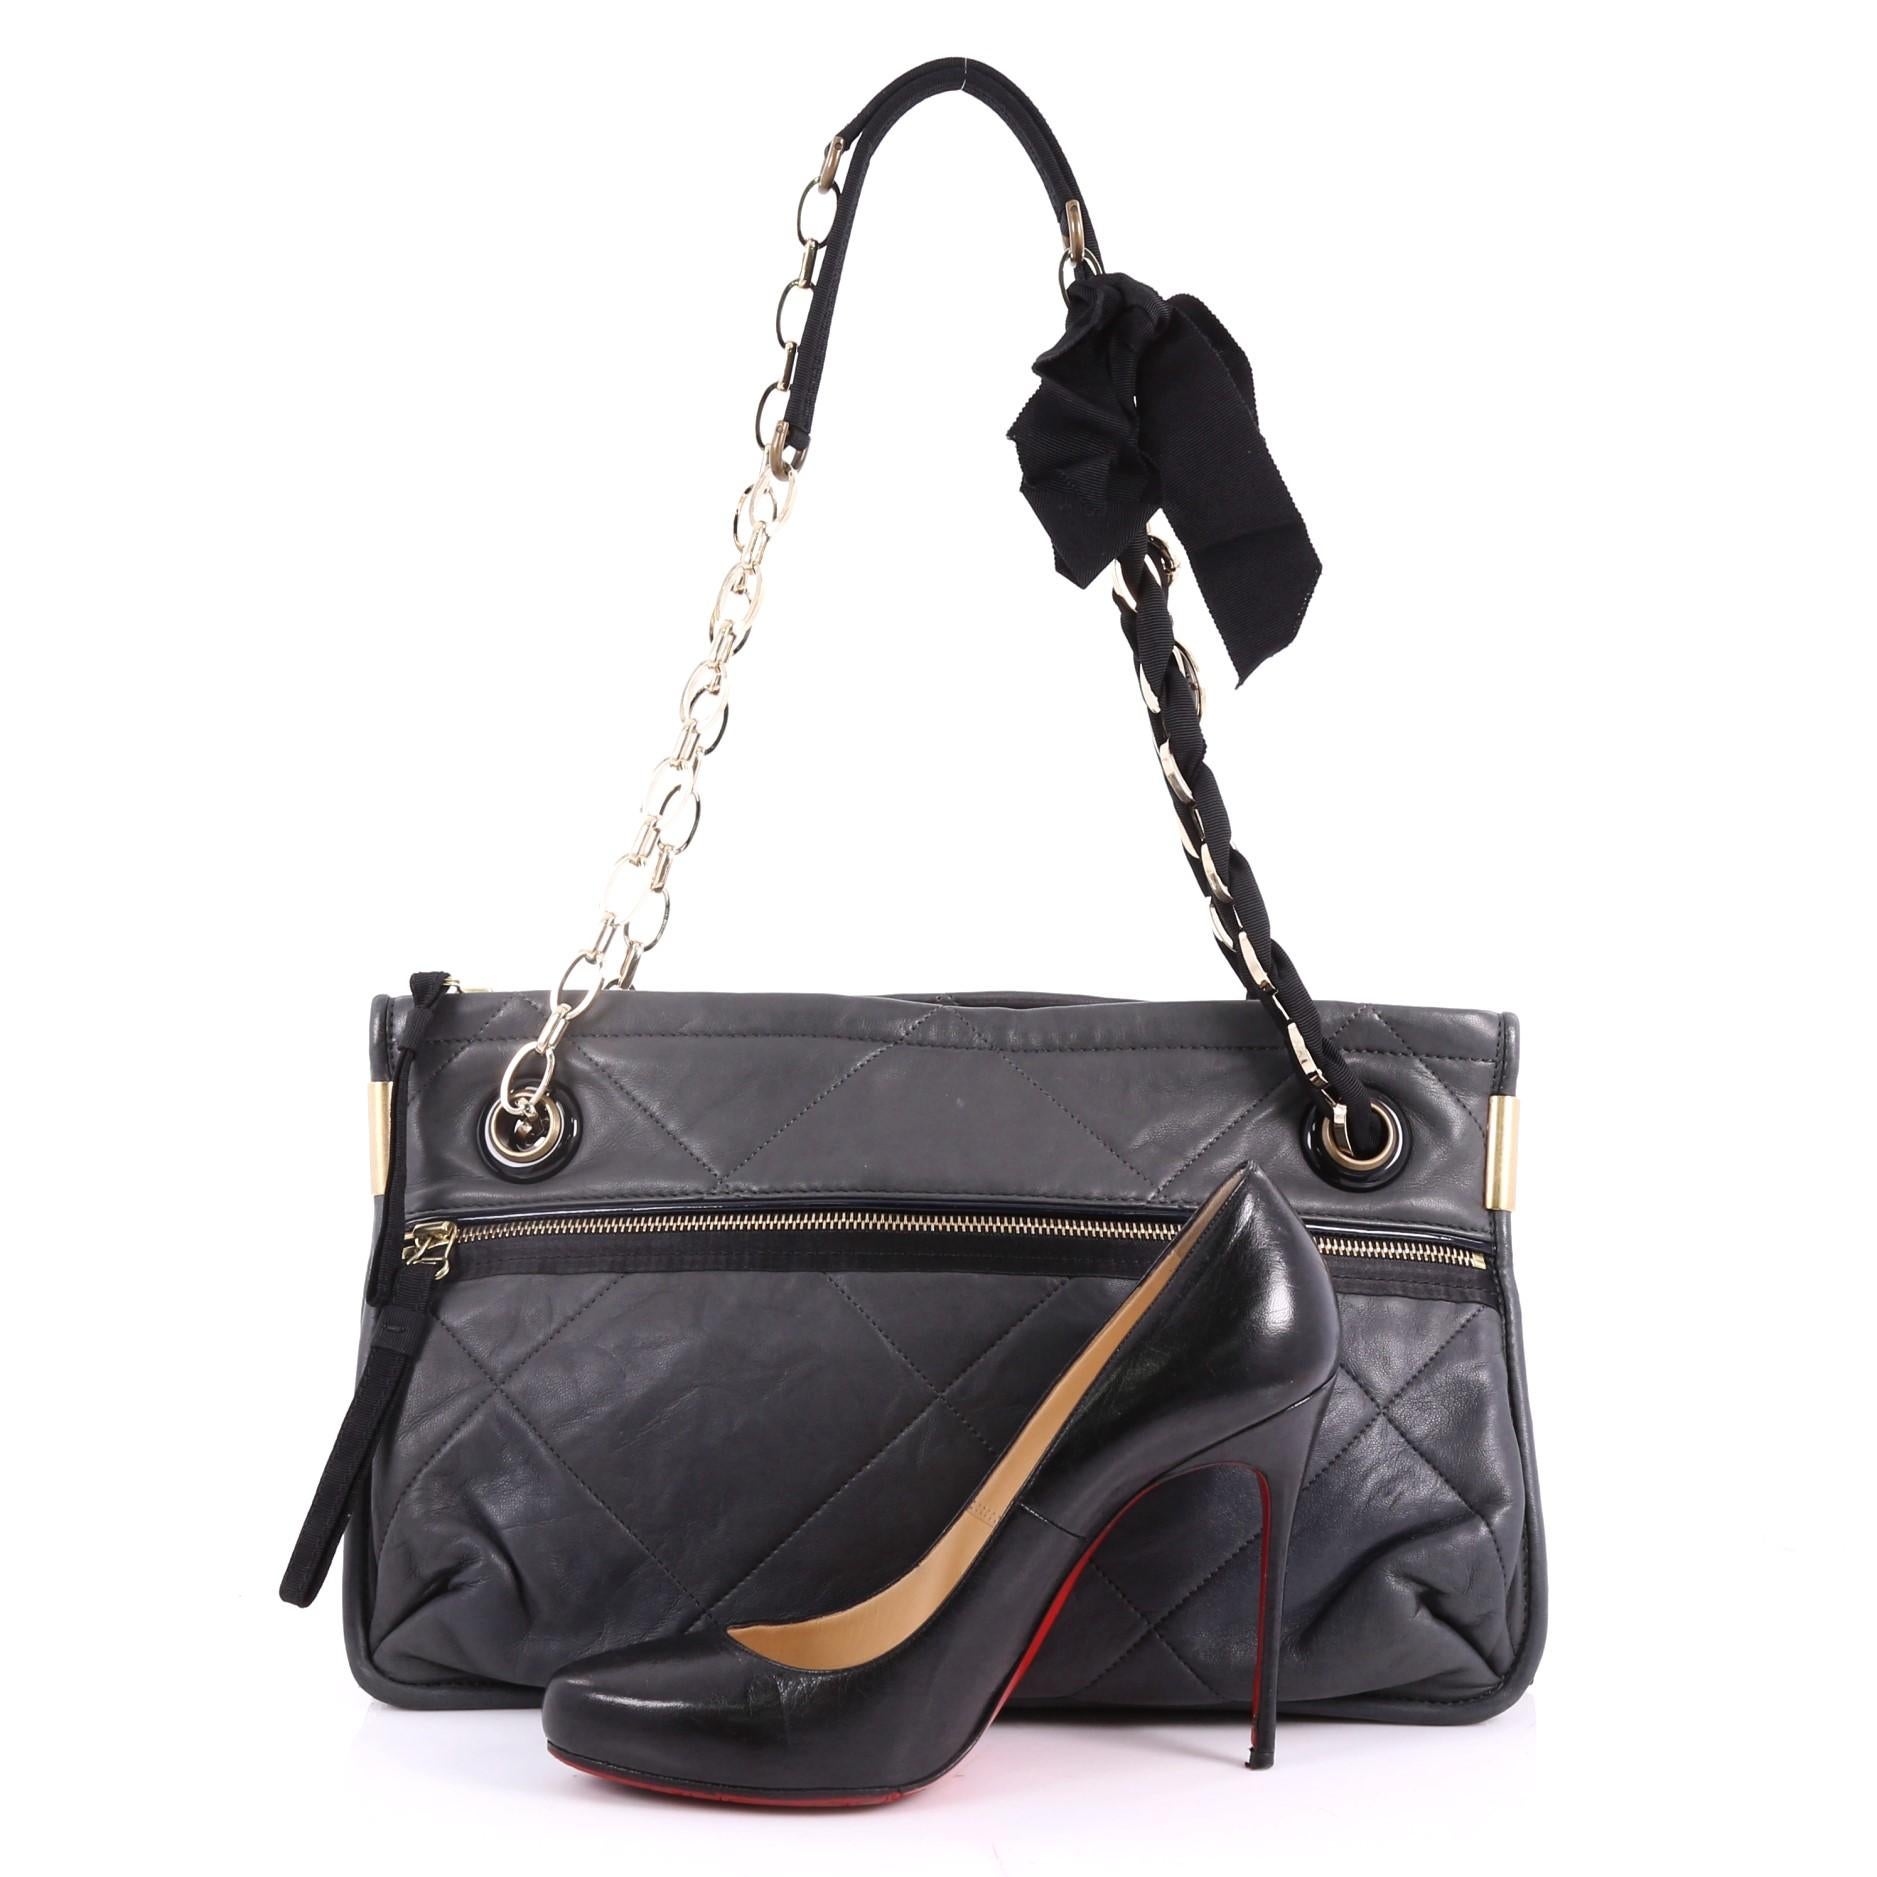 This authentic Lanvin Amalia Shoulder Bag Lambskin Medium hints at playful, modern femininity under a luxe, polished exterior. Crafted from grey quilted lambskin leather, this simple designed bag features signature chain-ribbon shoulder straps with